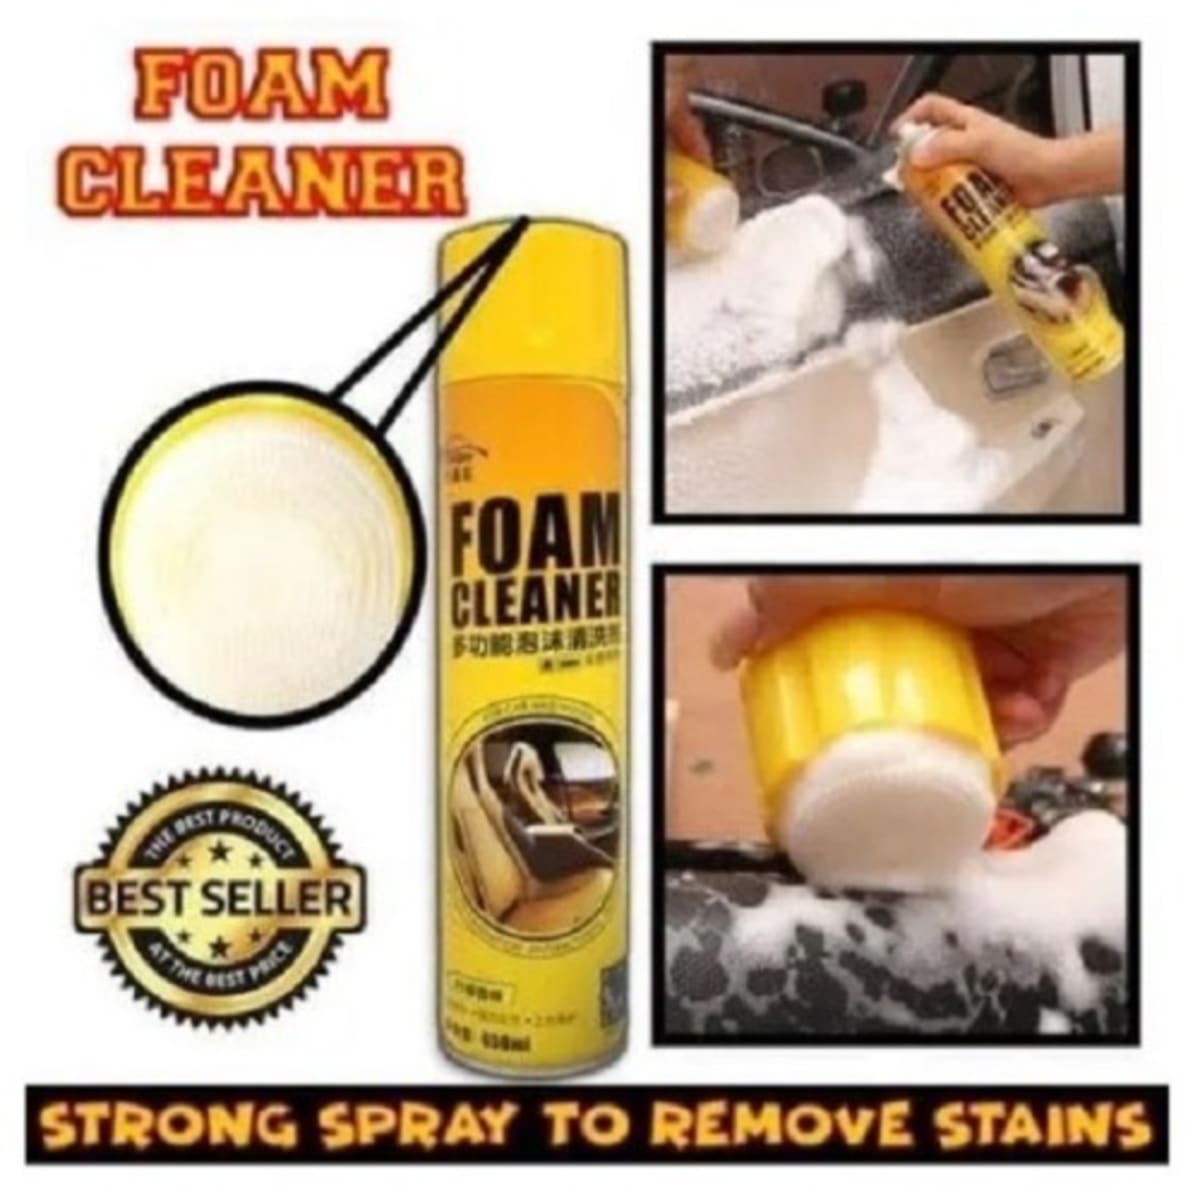 Multi-functional Car Foam Cleaner Cleaning Spray Powerful Stain